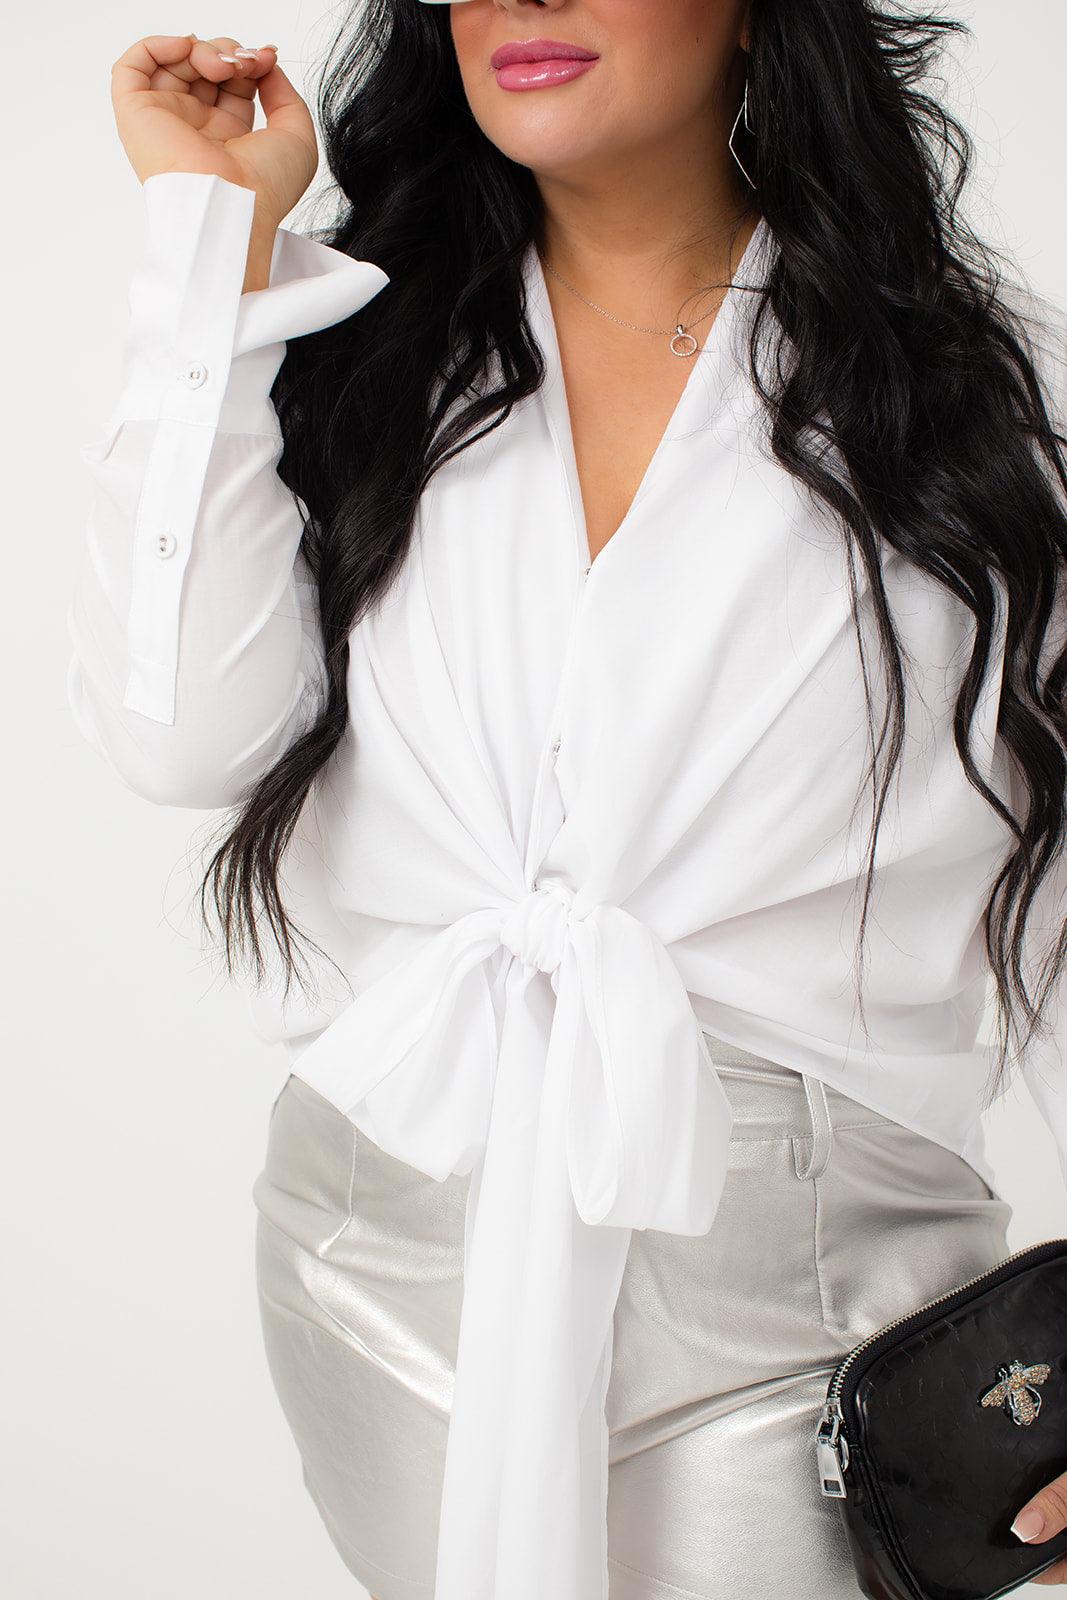 The White Bow Tie Blouse exudes elegance with its v neckline and long sleeves. The snap button front allows for easy wear, while the double button cuff closure adds a touch of sophistication. The high low hem creates a modern and stylish look. Perfect for a formal occasion or professional setting.